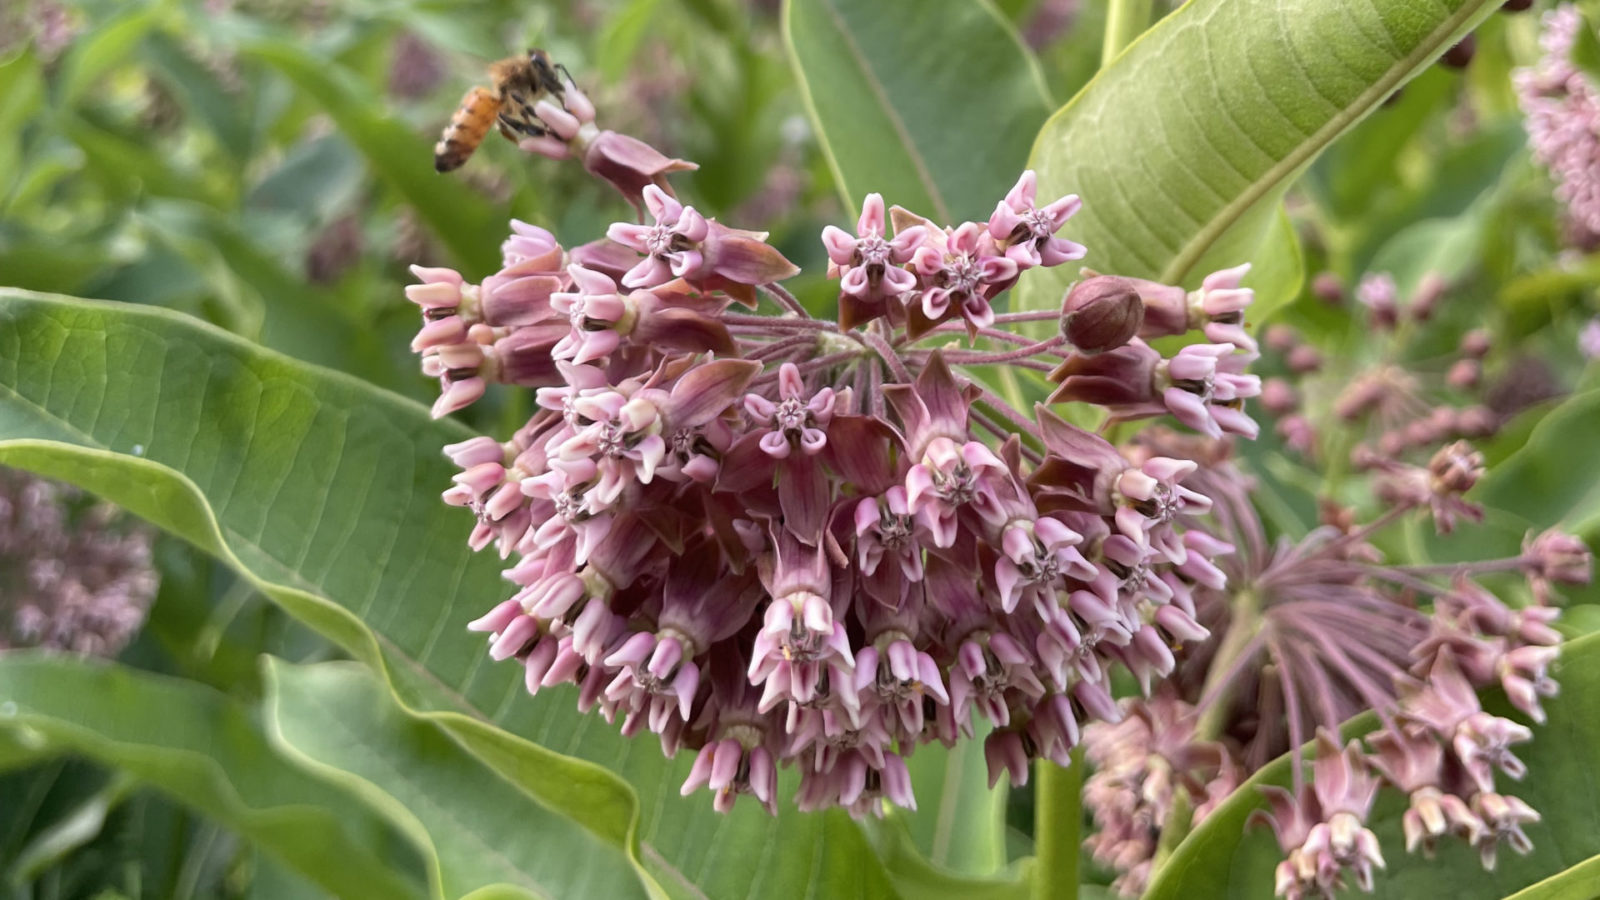 Milkweed blooms in a meadow at the foot of the hills.